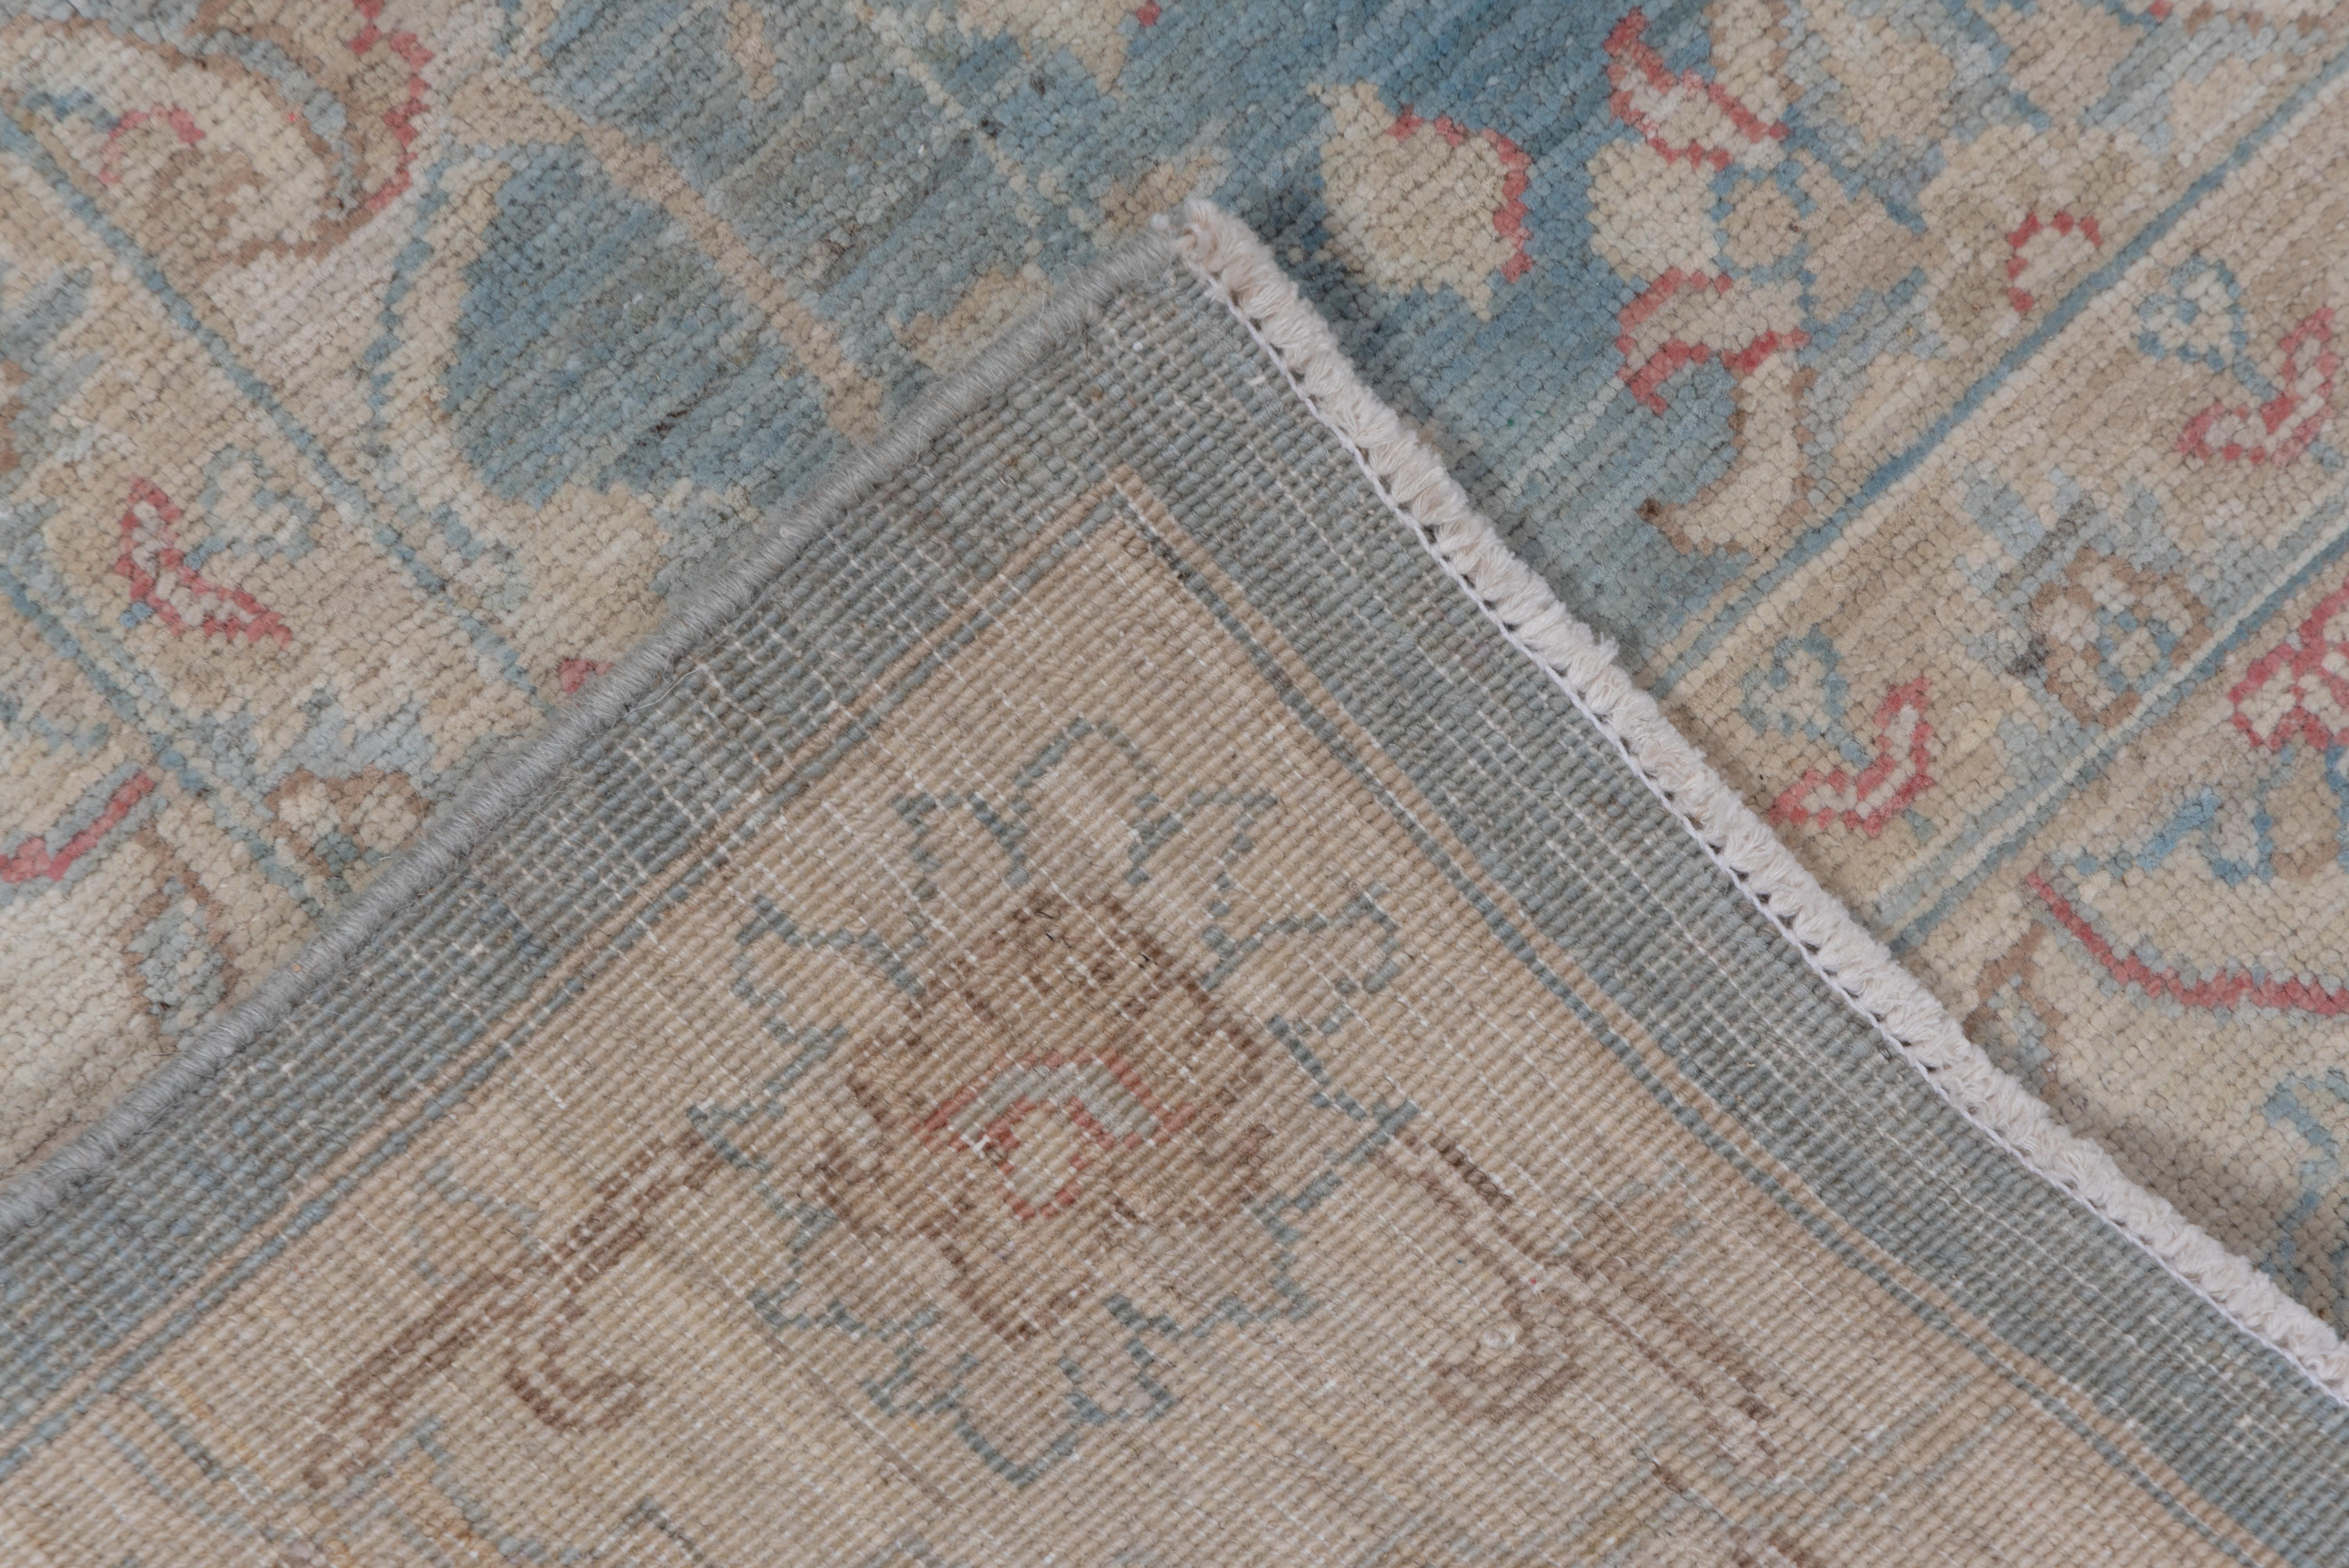 The light blue field displays an allover pattern of connected circles and ellipses in the west Persian Mahal manner, with cartouche-rosettes and clusters of small ecru flowers filling in. The creamy beige border features complete flowers and